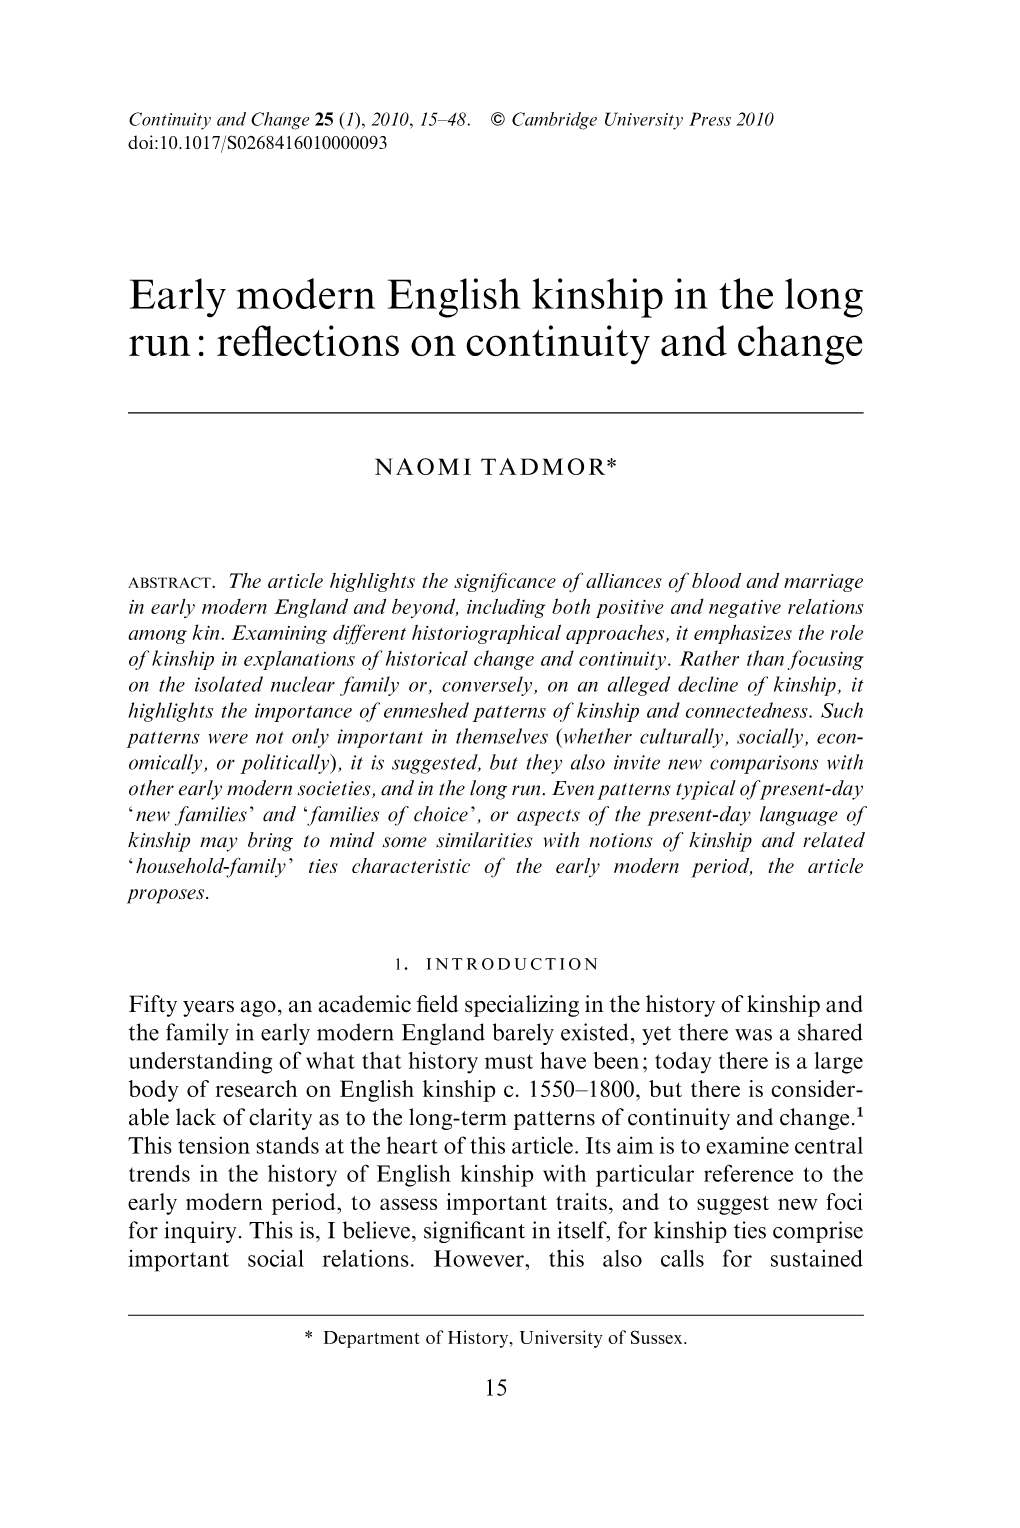 Early Modern English Kinship in the Long Run: Reflections on Continuity